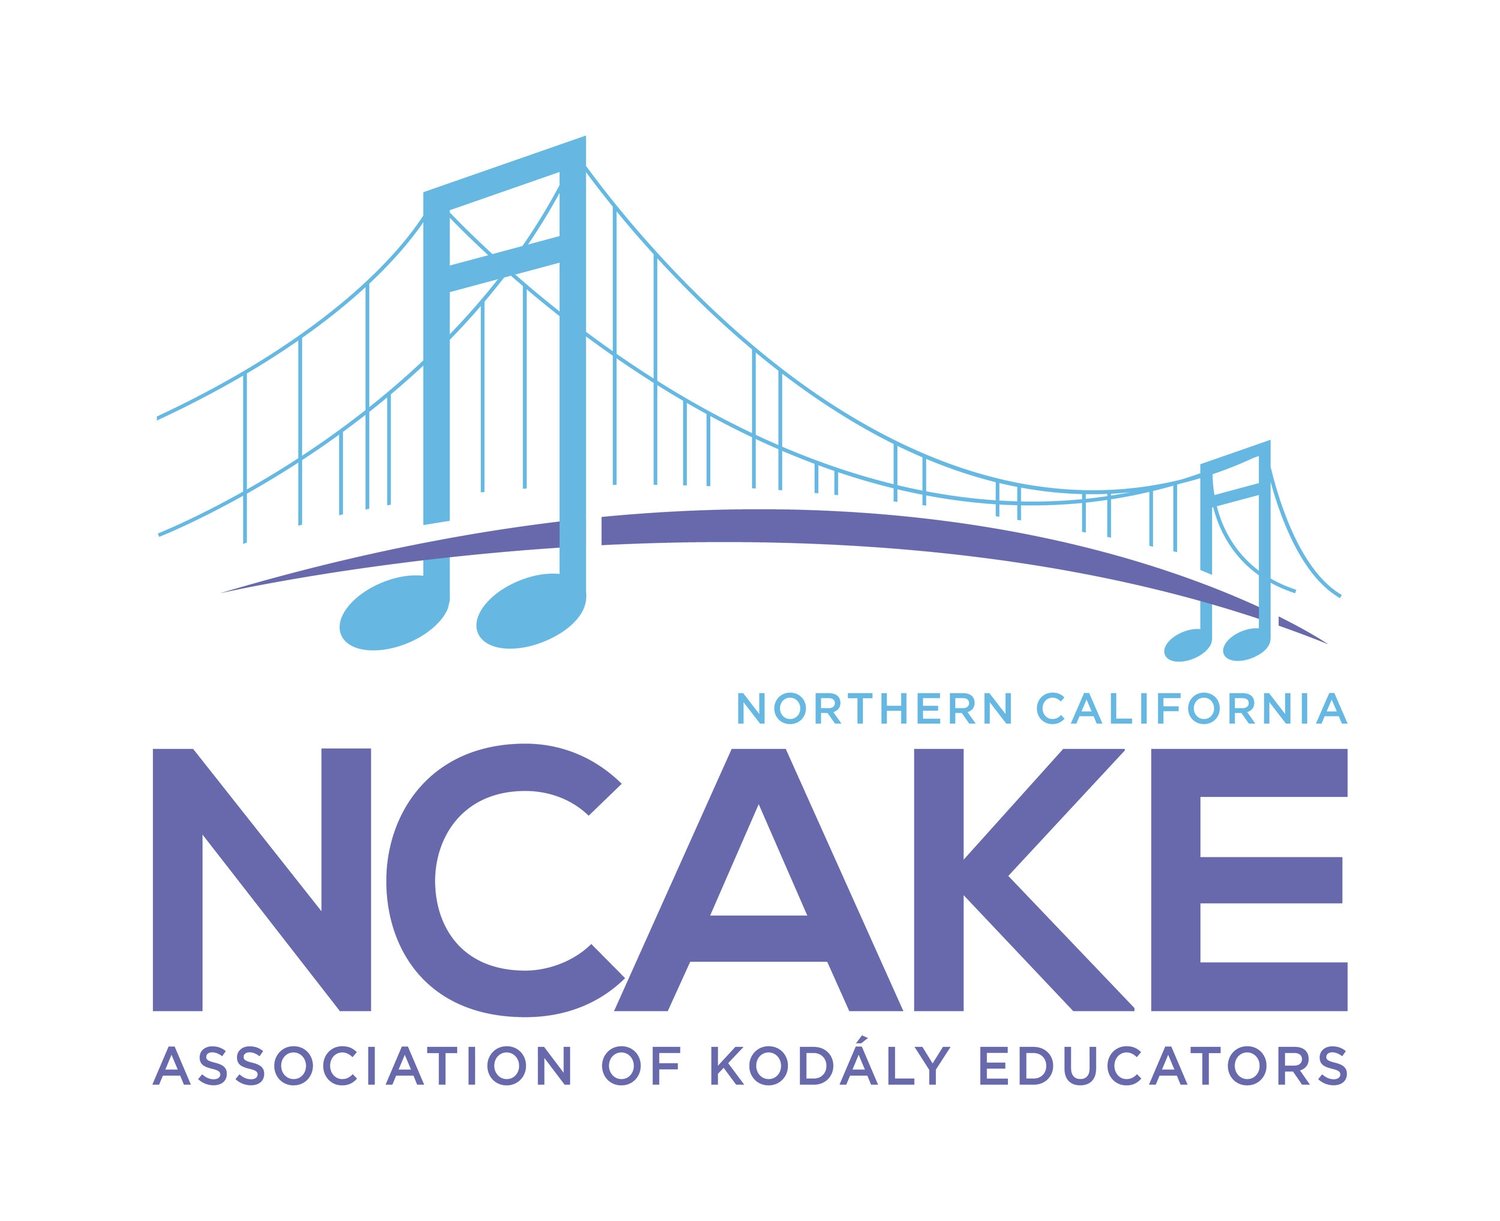 Northern California Association of Kodály Educators